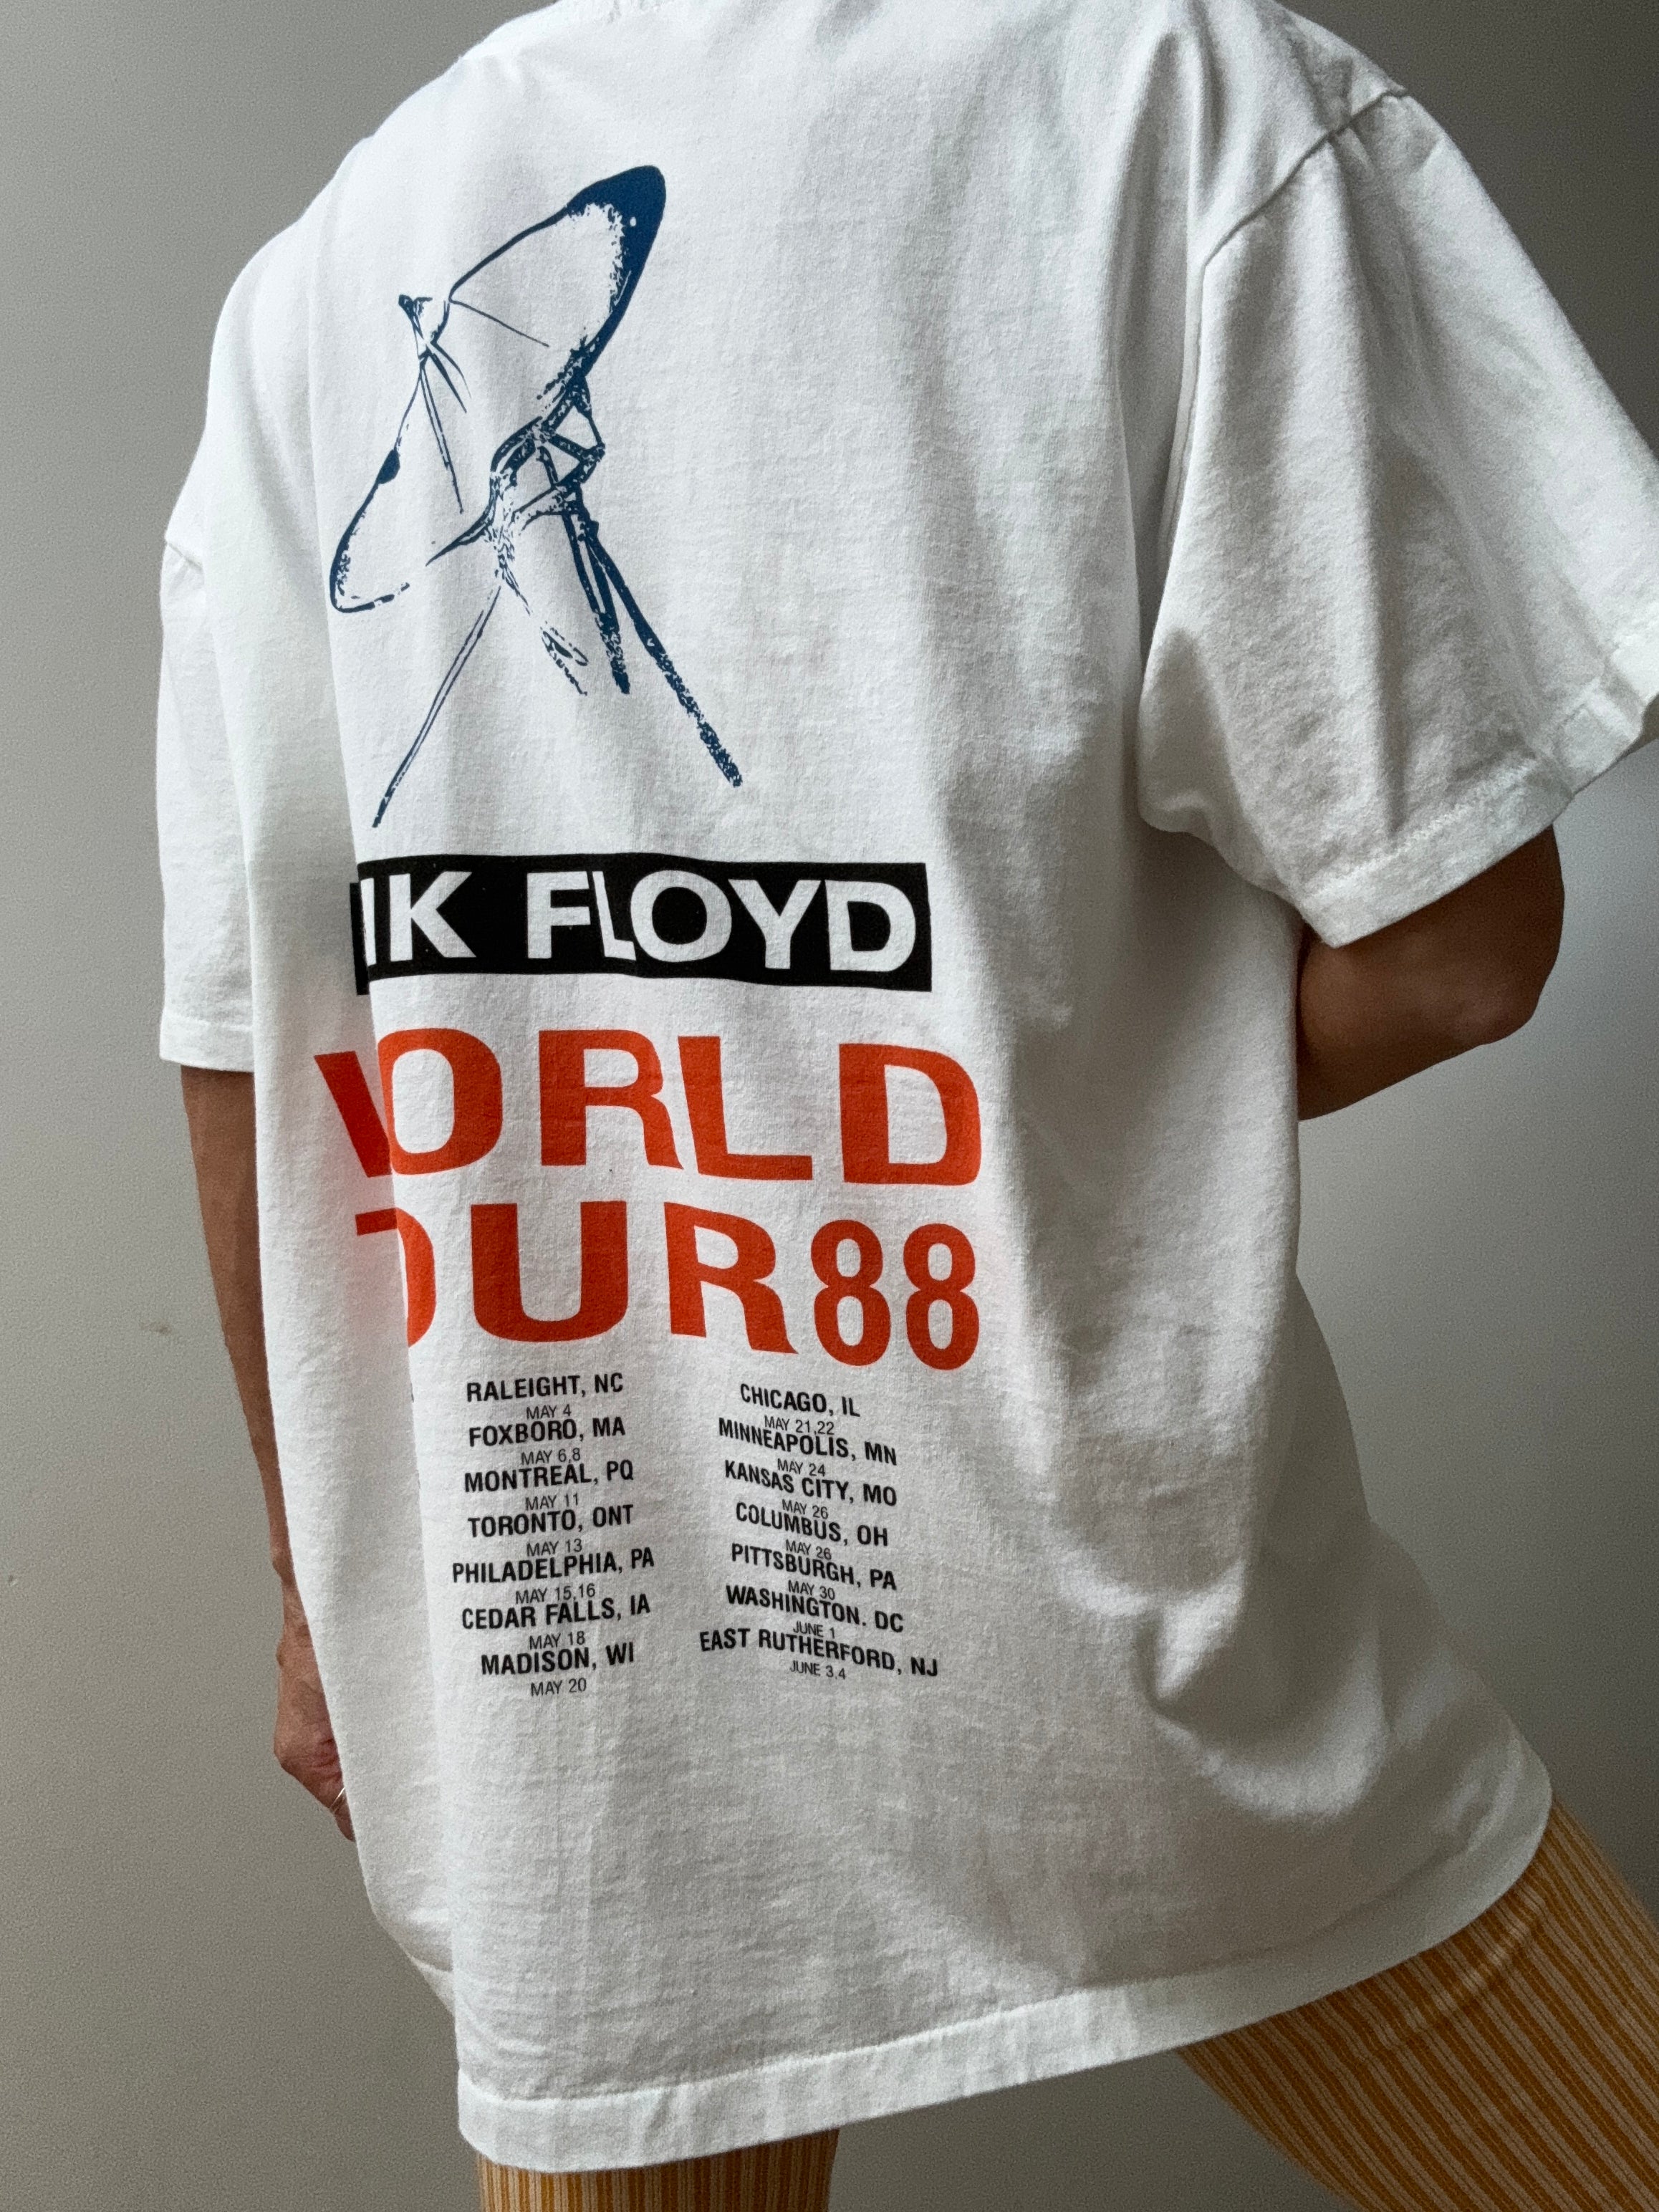 Future Nomads Tops Vintage Style Tee Pink Floyd White